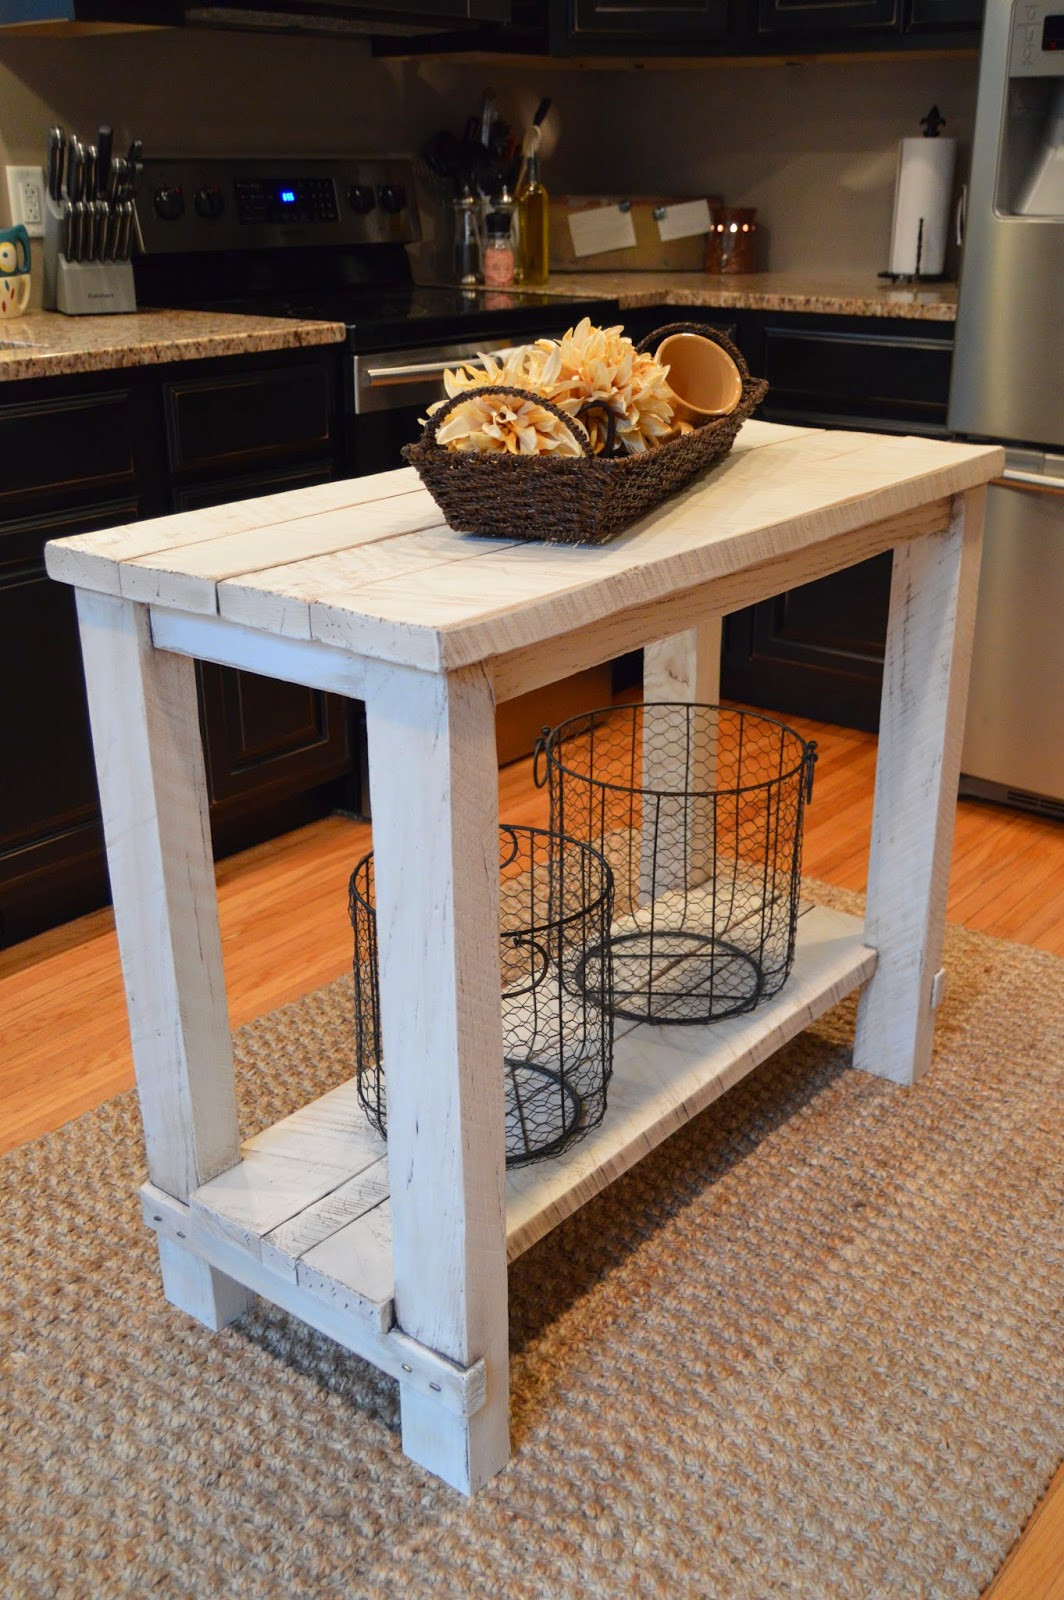 Island Table For Small Kitchen
 15 Gorgeous DIY Kitchen Islands For Every Bud